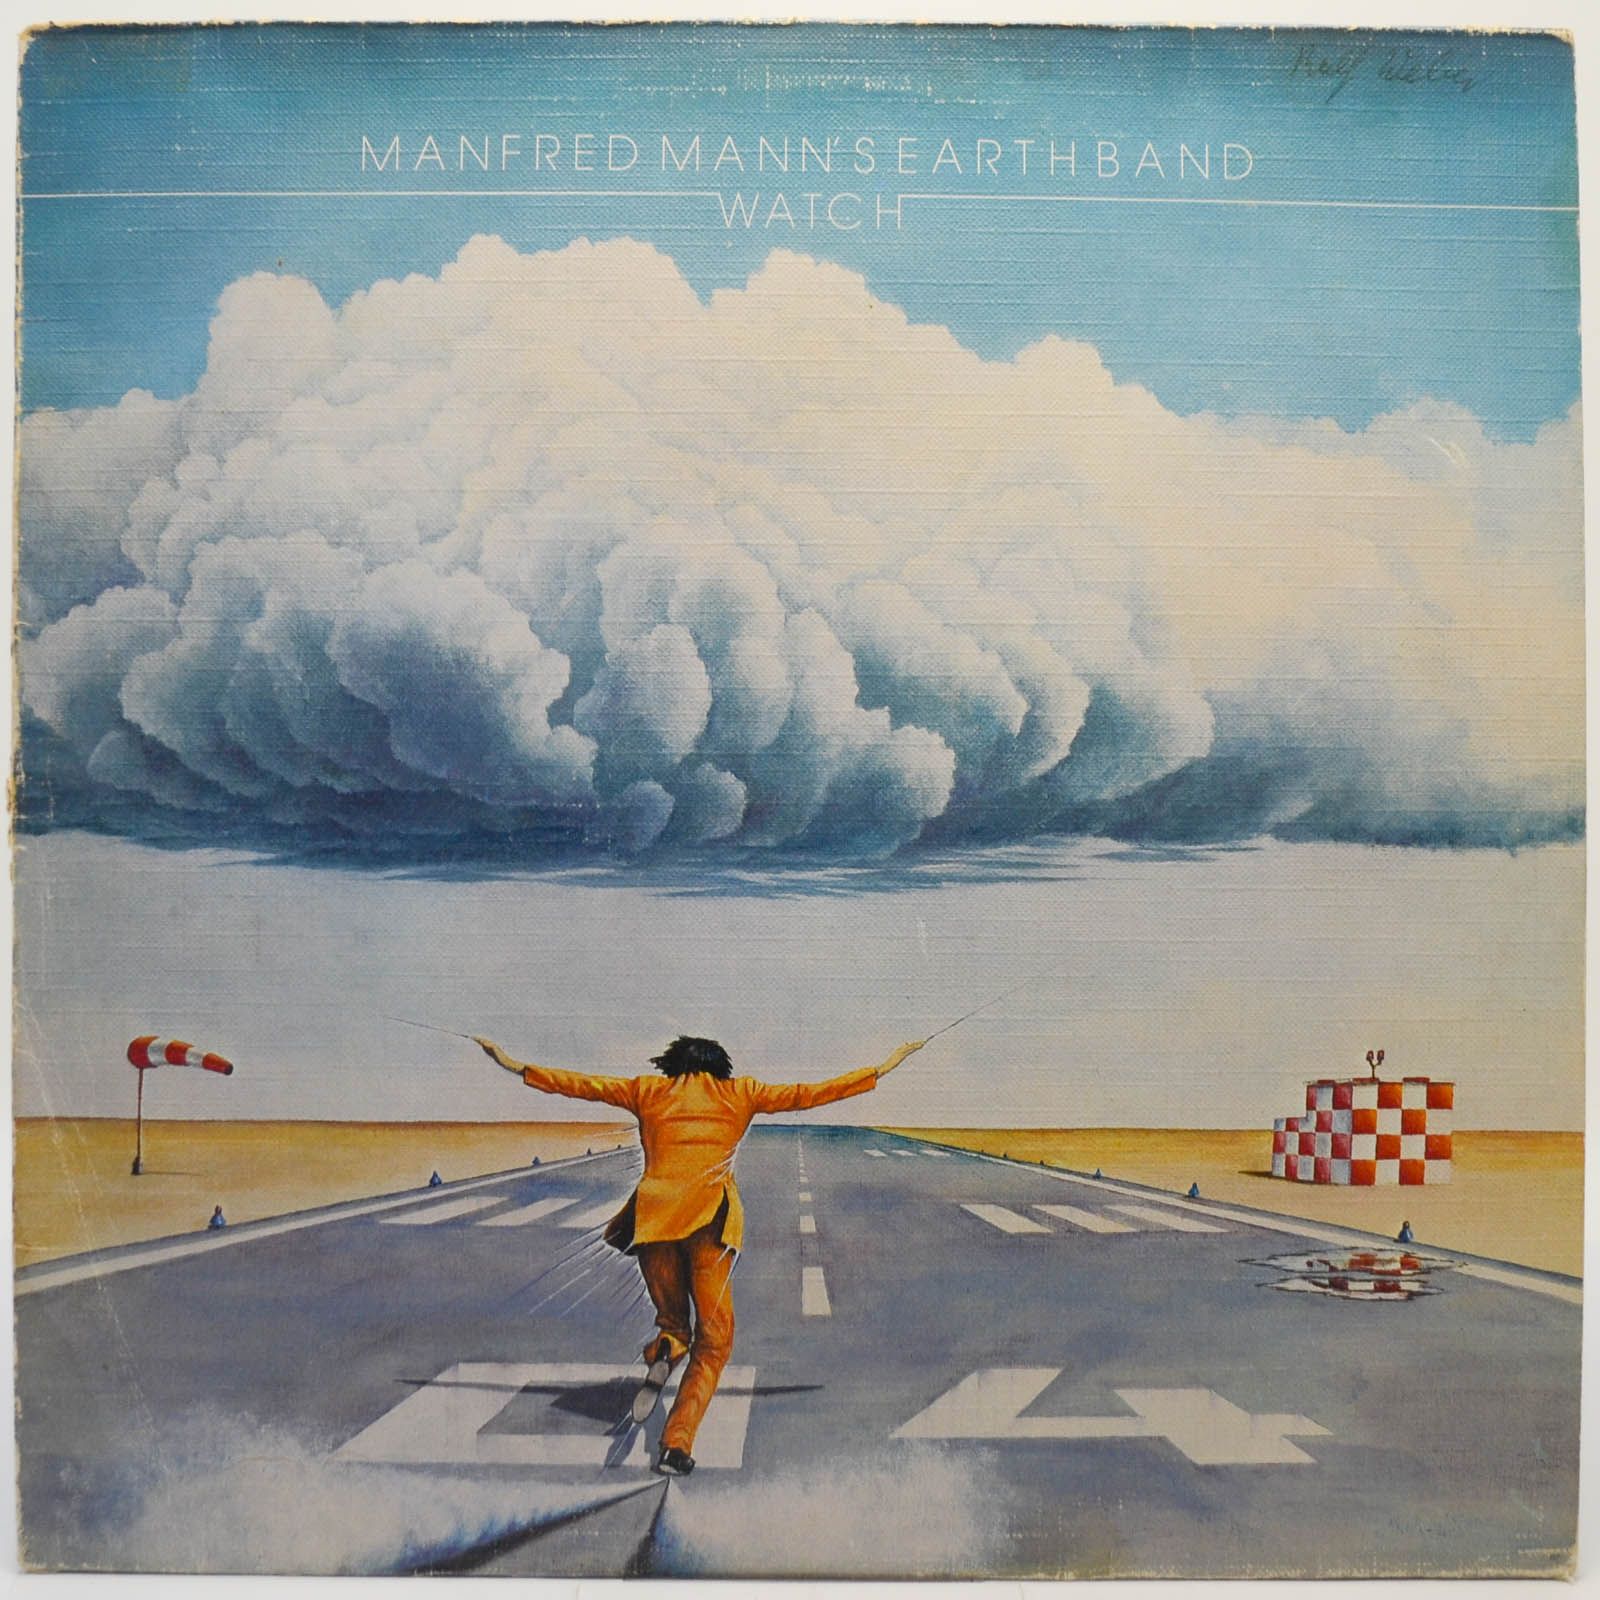 Manfred Mann's Earth Band — Watch, 1978